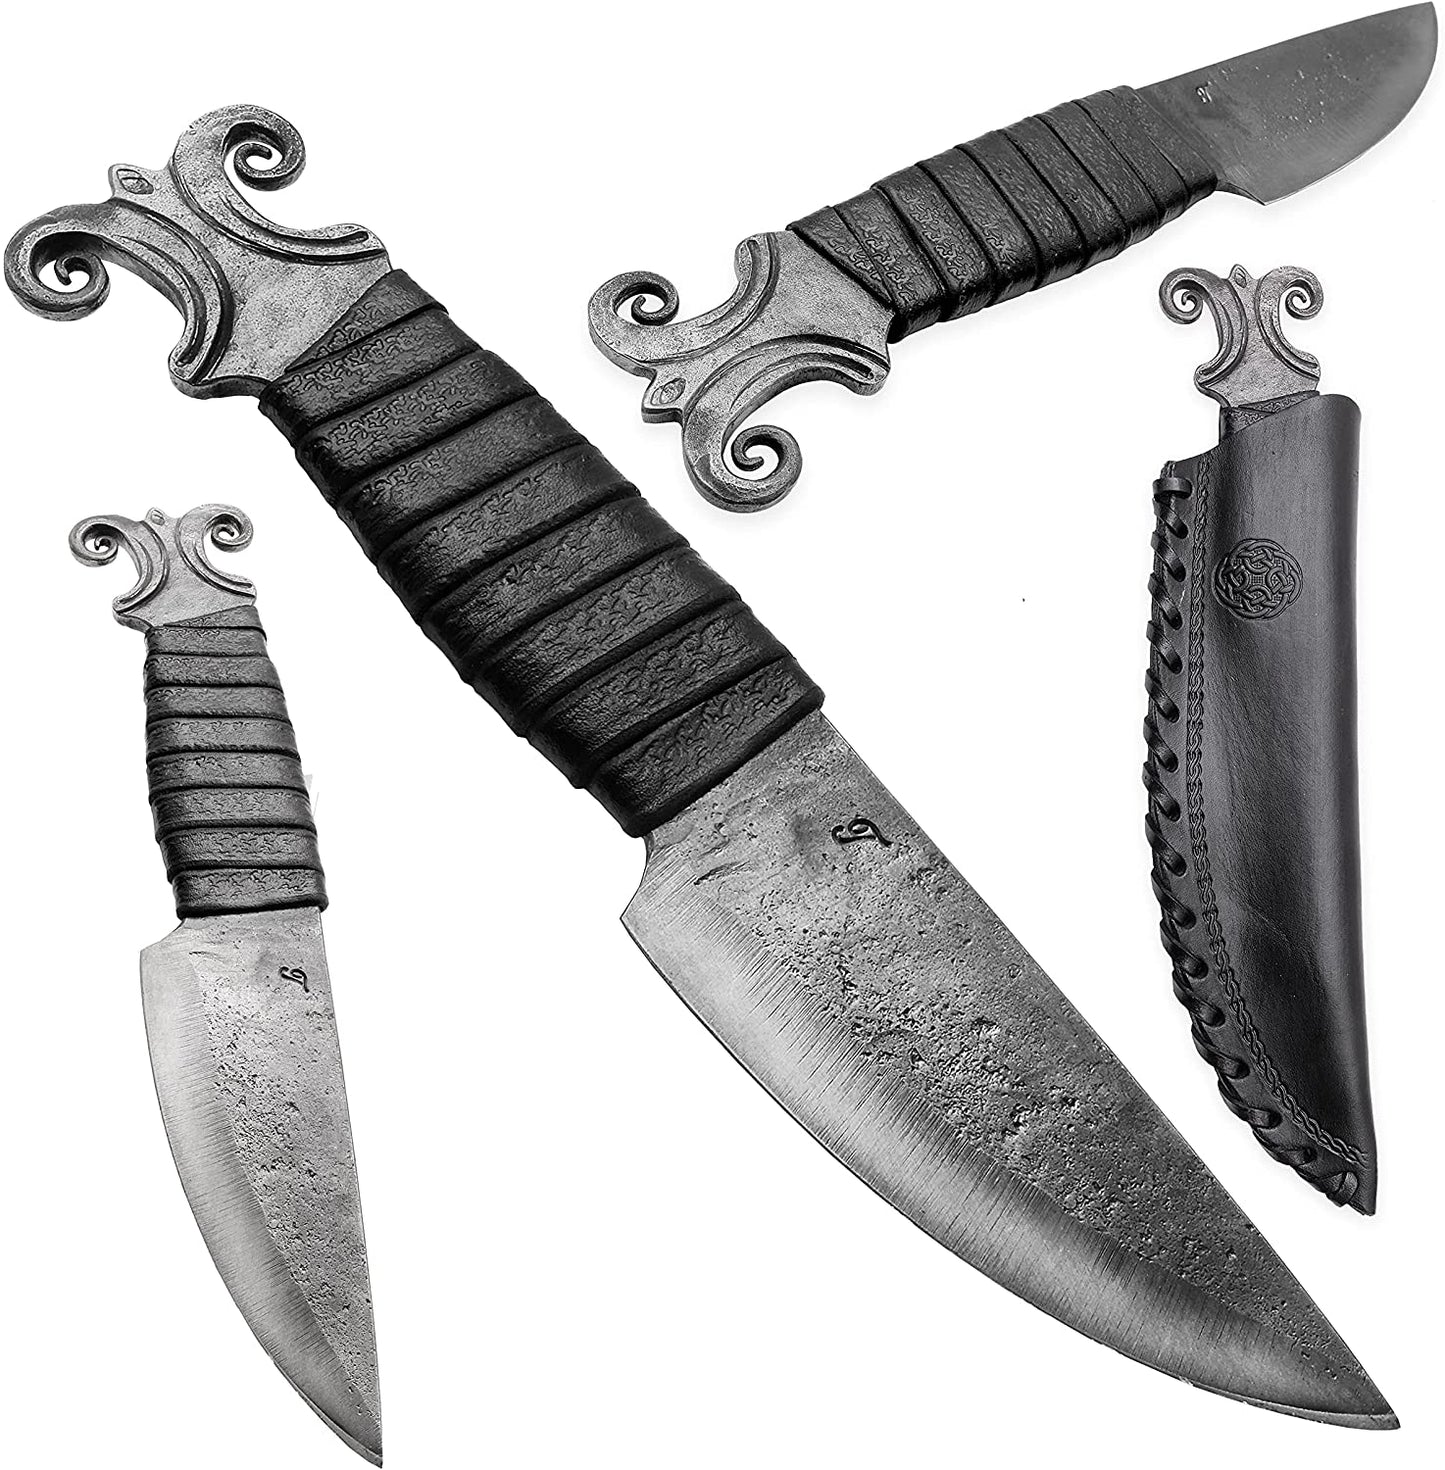 Forged Celtic knife Aries with scabbard